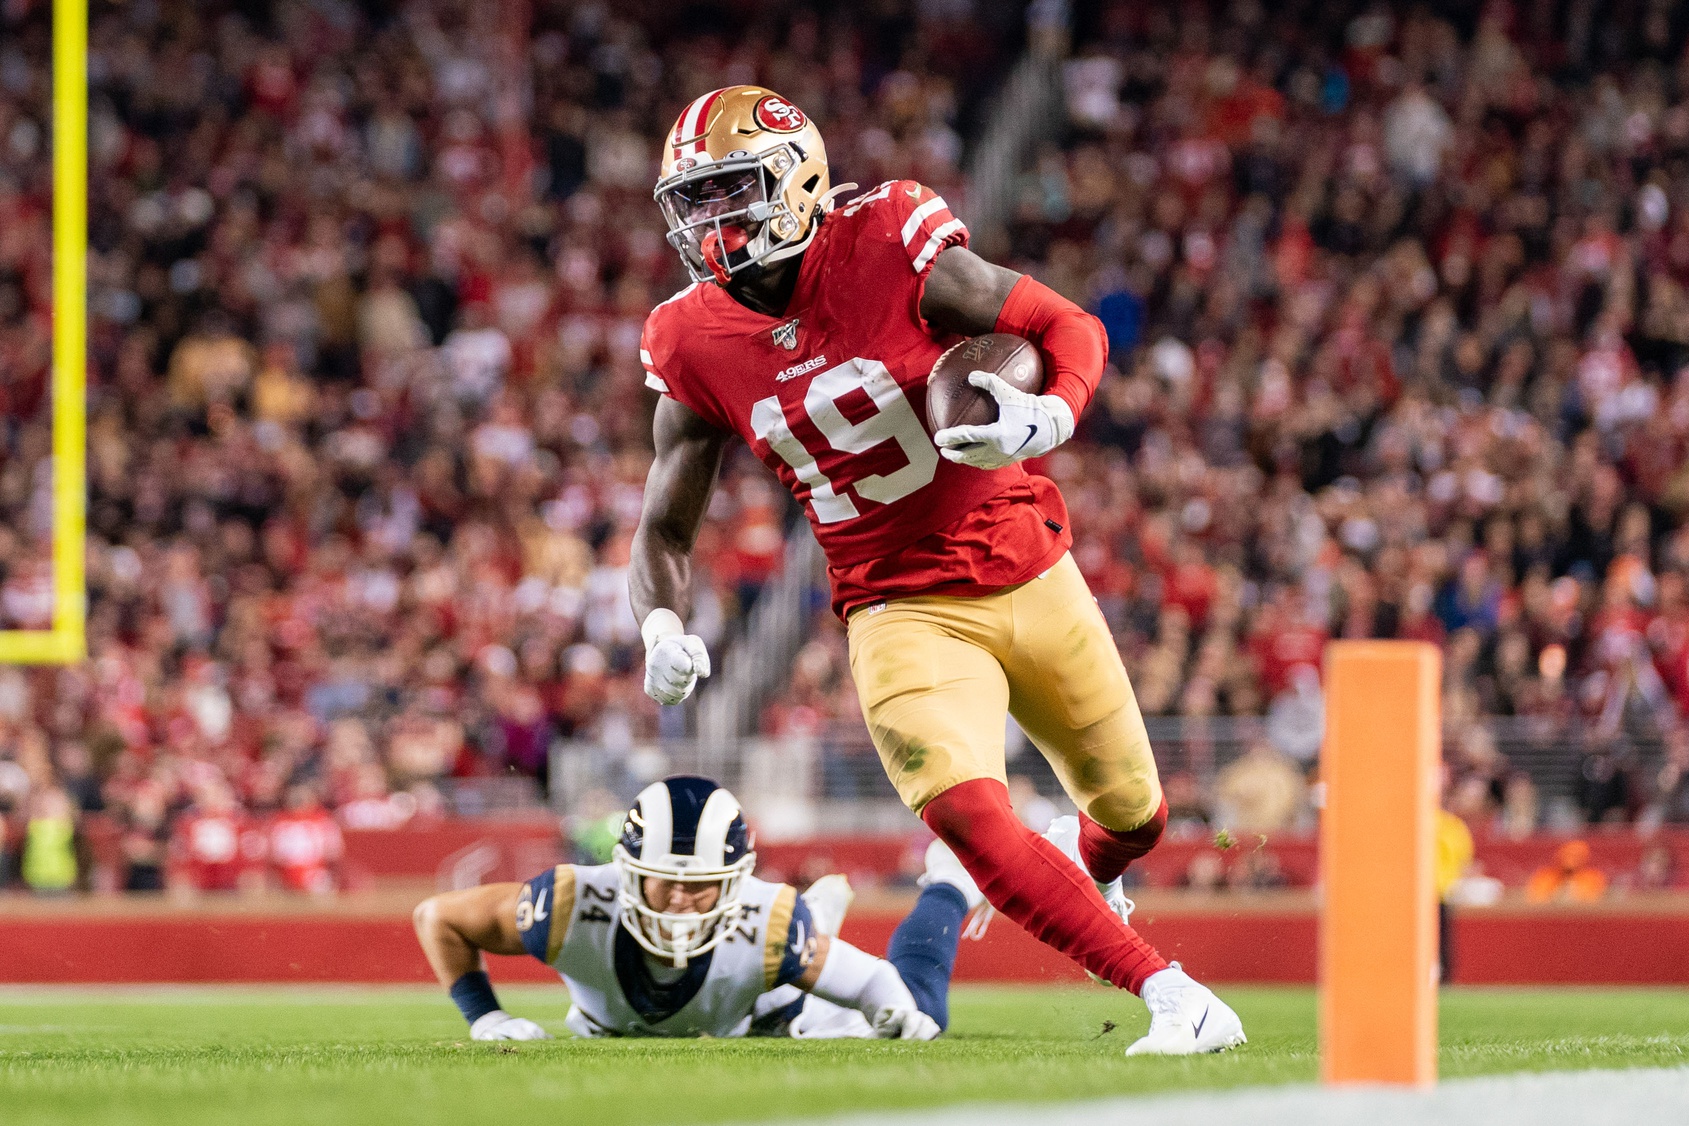 2020 NFL Team Preview Series San Francisco 49ers NFL News, Rankings